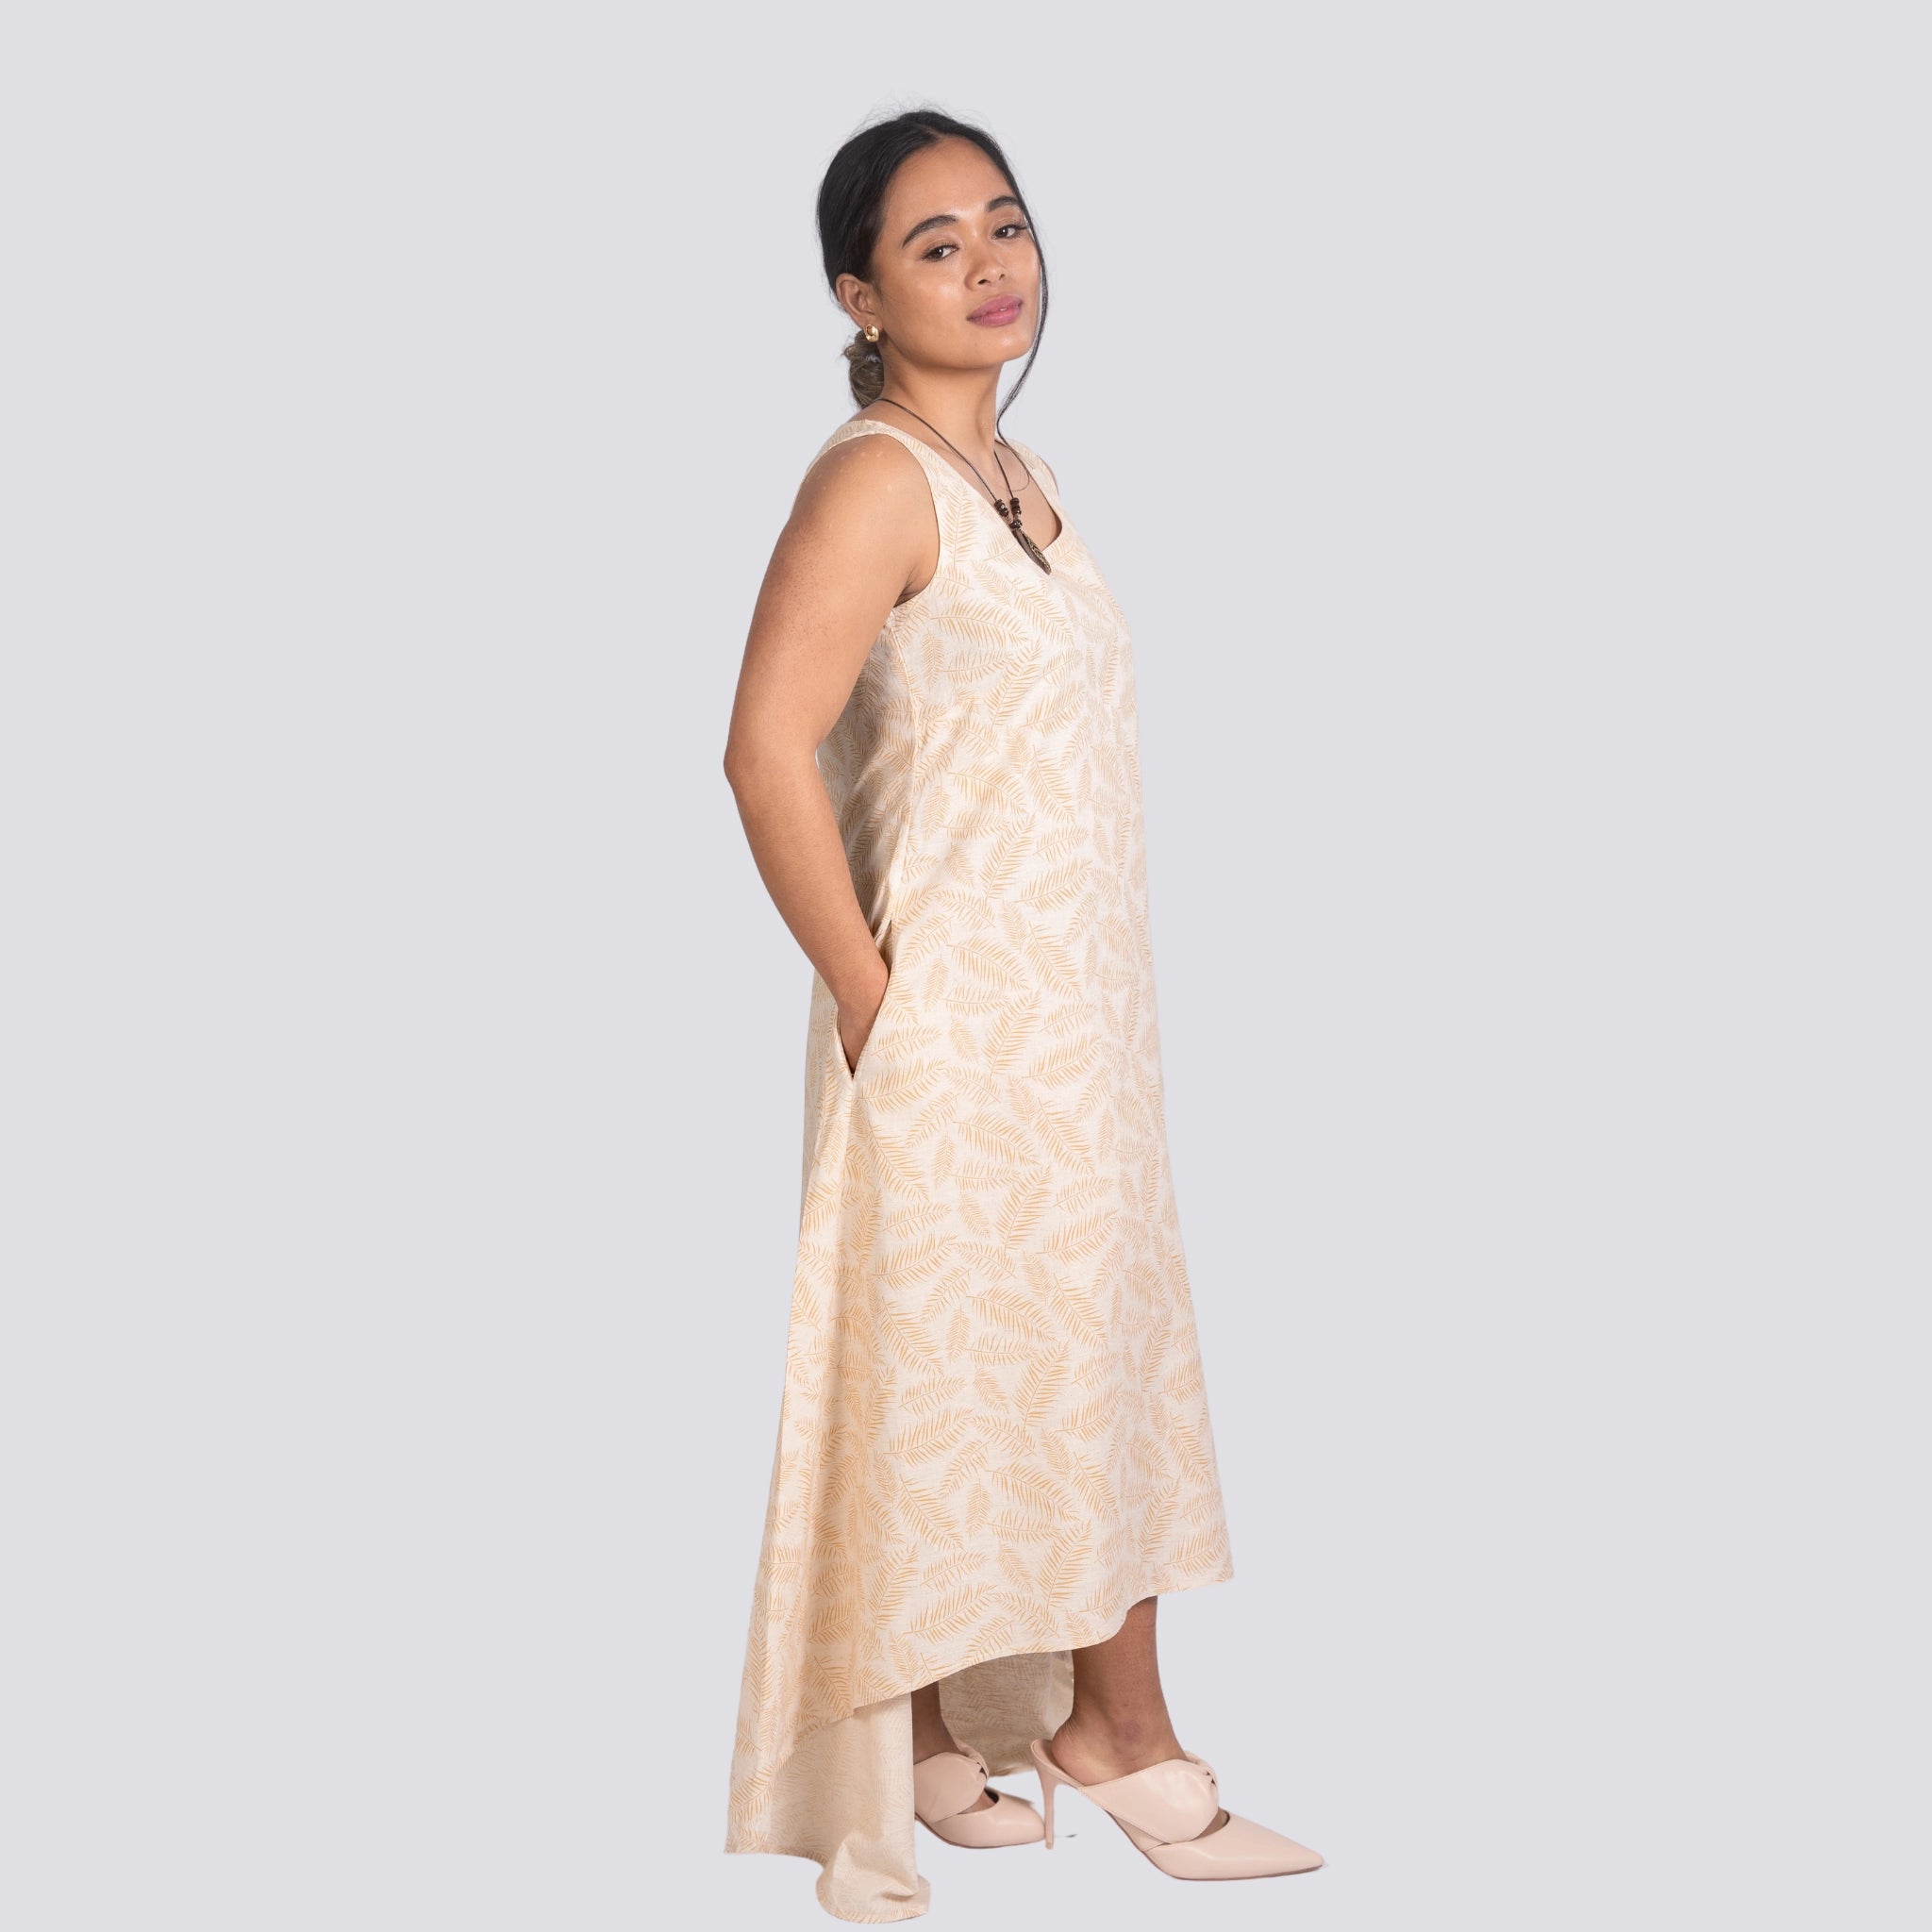 Woman in an elegant beige Karee High Low Linen Cotton Midi Dress and white shoes, standing sideways and looking over her shoulder, against a light gray background.